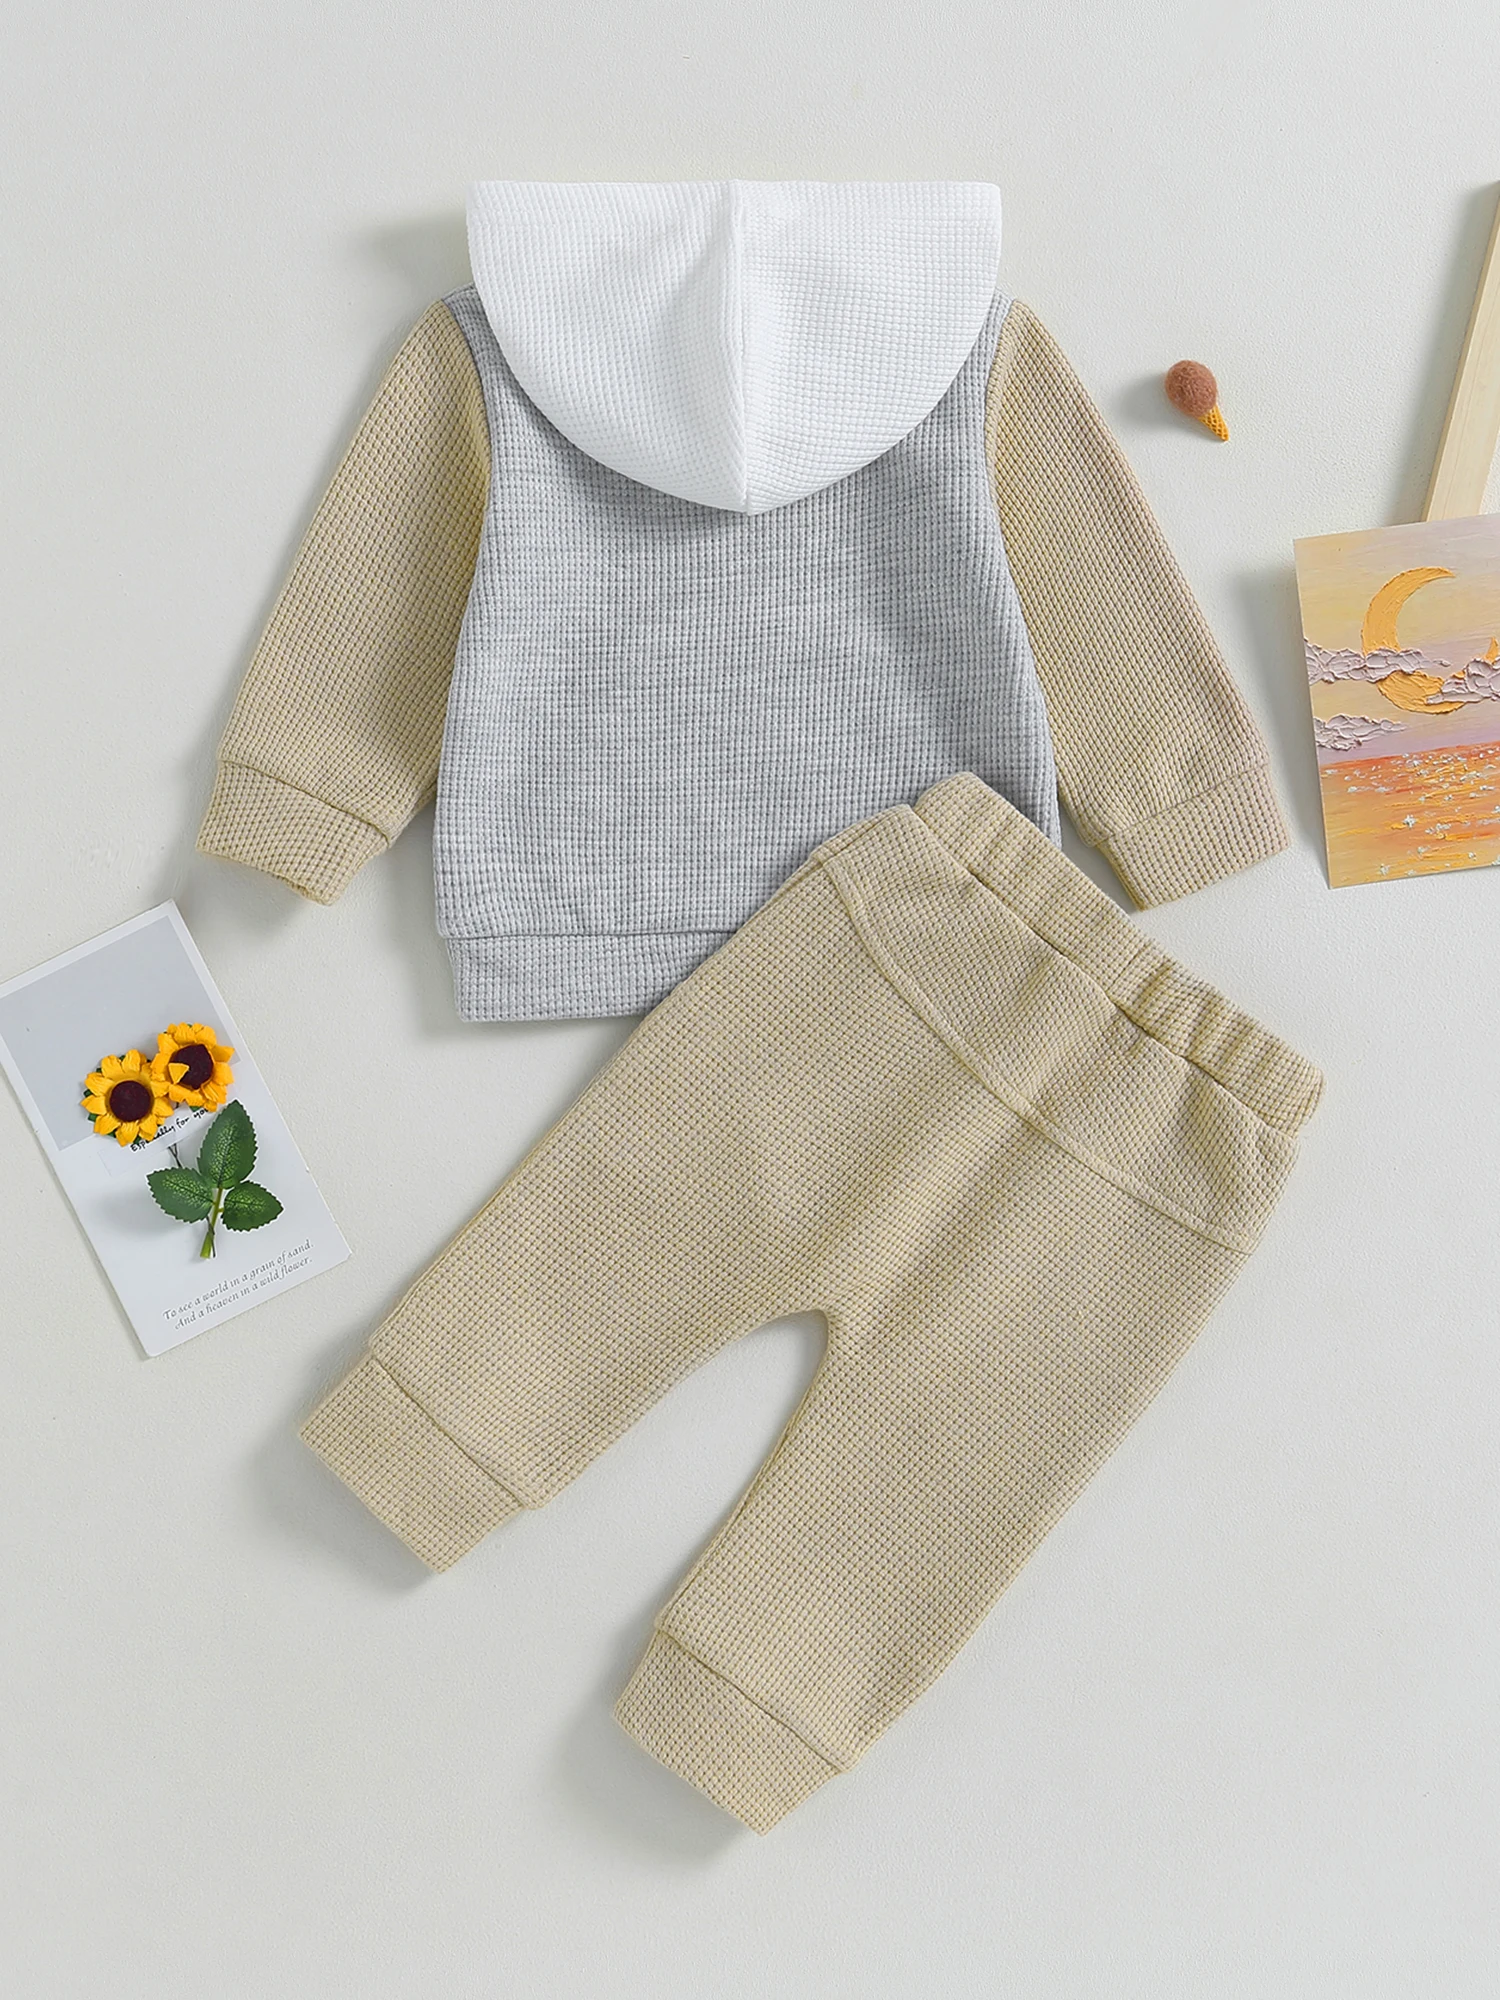 

Adorable Contrast Color Hooded Sweatshirt and Casual Pants Set for Newborn Baby Boys - Perfect Fall Outfit for Your Little